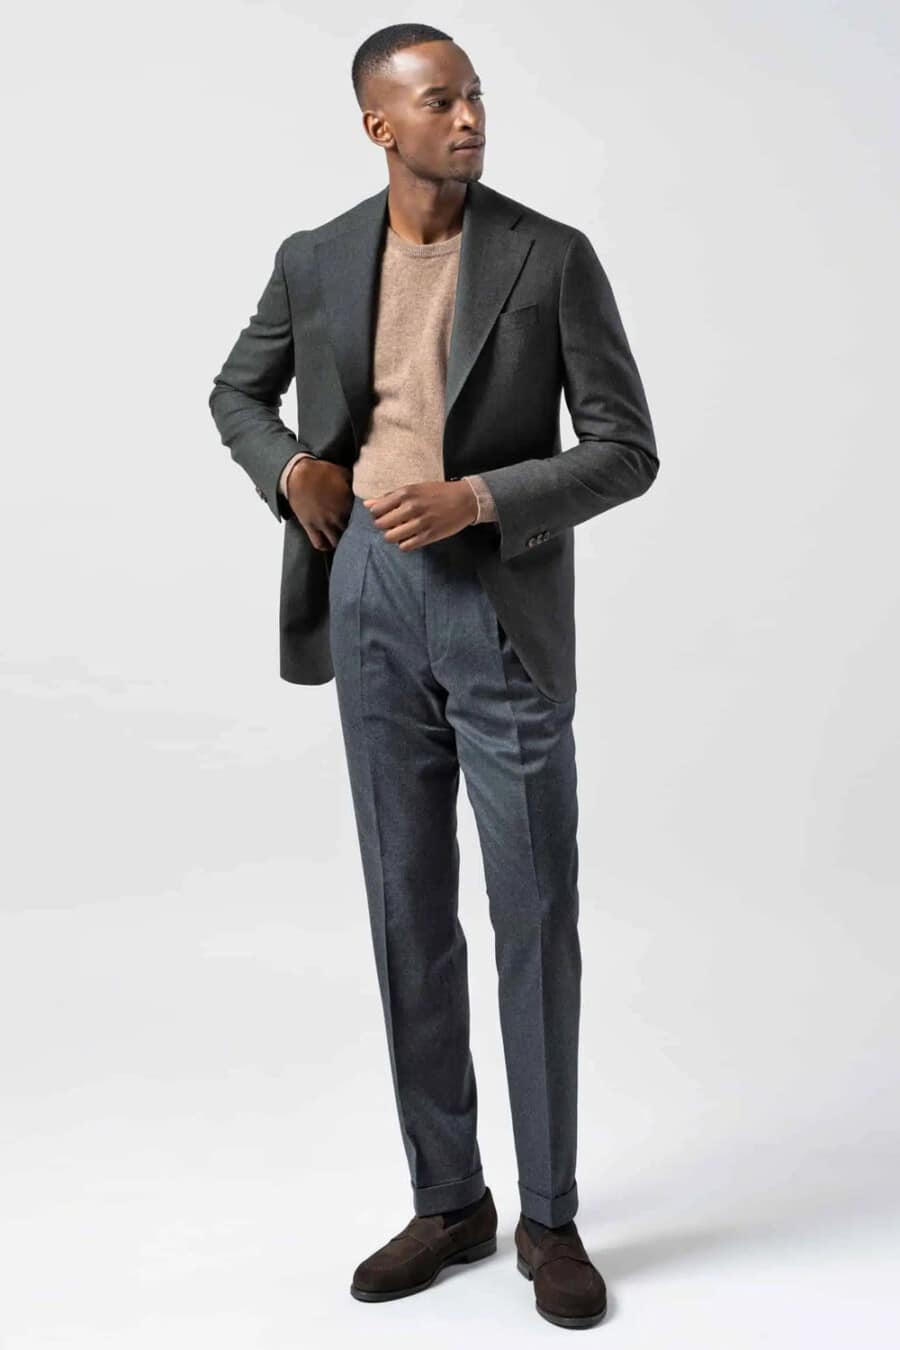 Men's grey flannel tailored pants, camel merino crew neck sweater, grey flannel blazer and brown suede penny loafers outfit